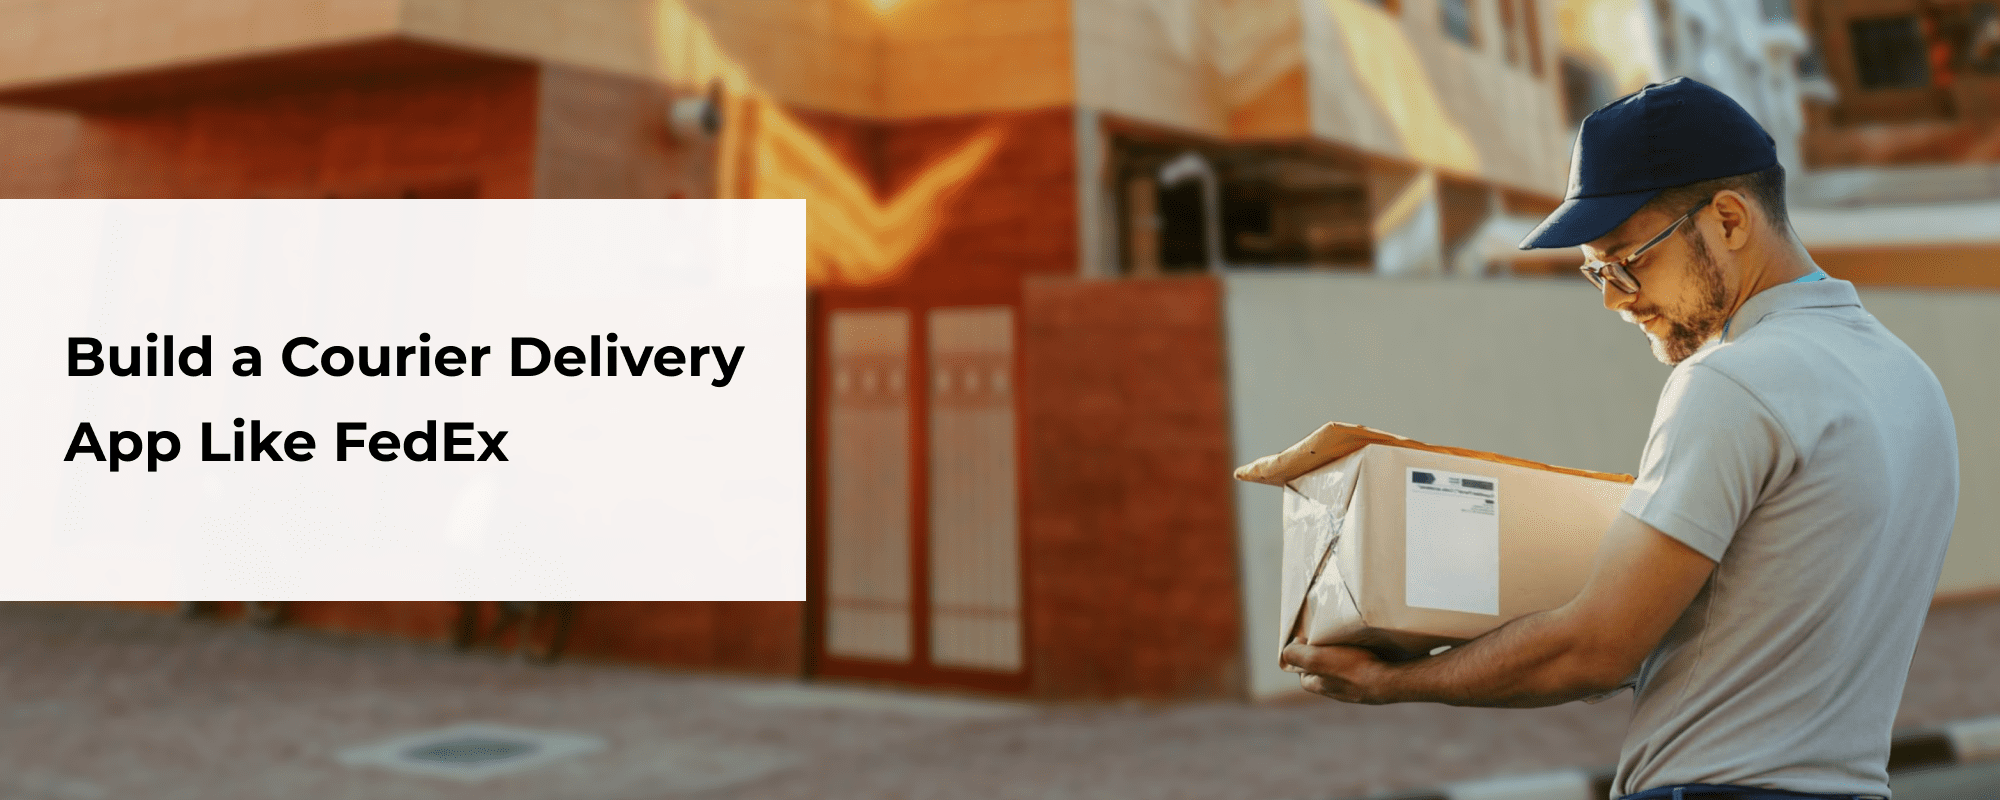 How to Build Courier Delivery App like FedEx